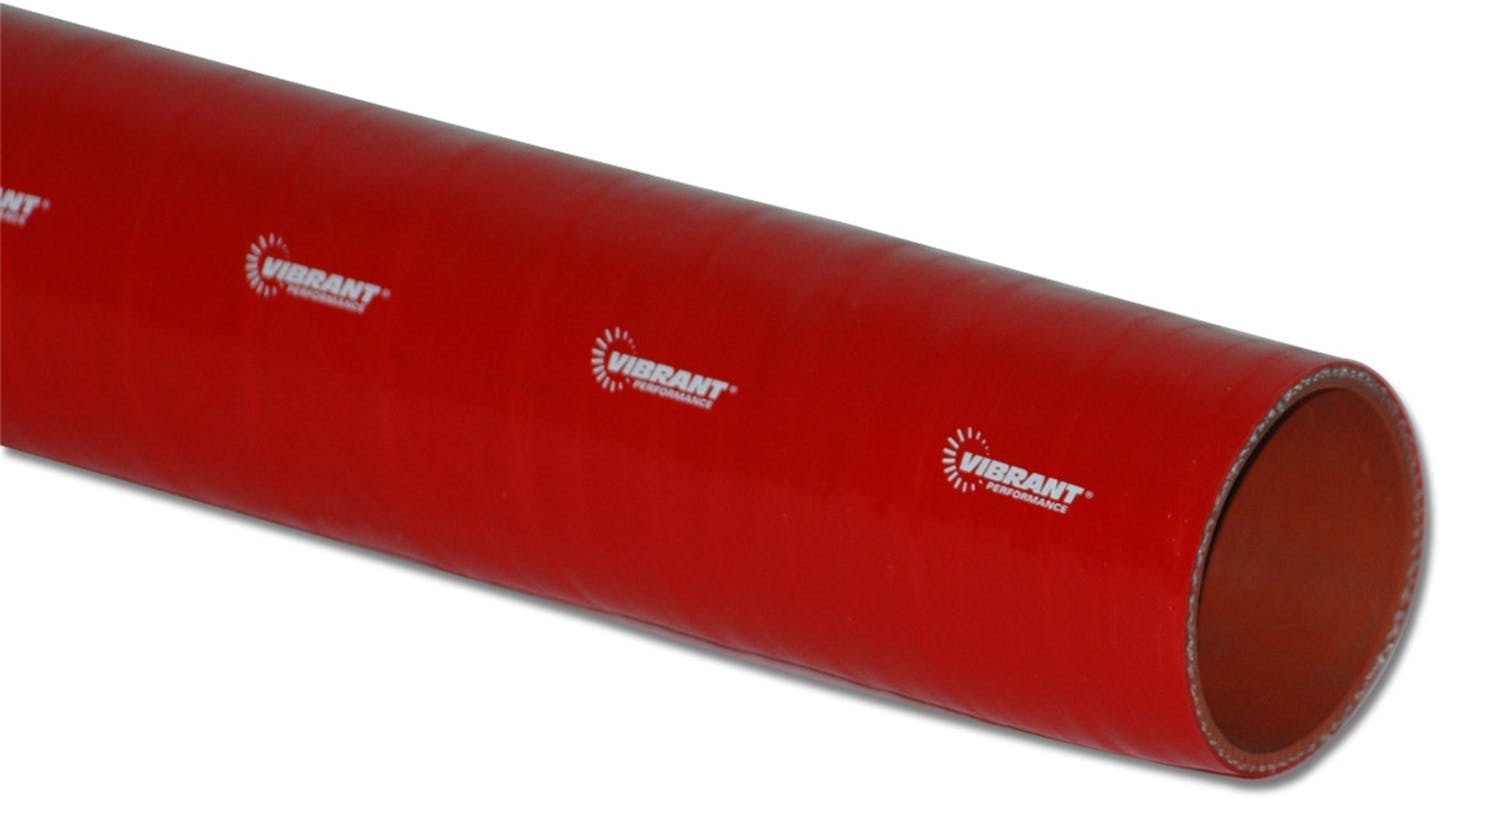 Vibrant Performance 27071R 4 Ply Silicone Sleeve, 2 inch I.D. x 12 inch Long - Red